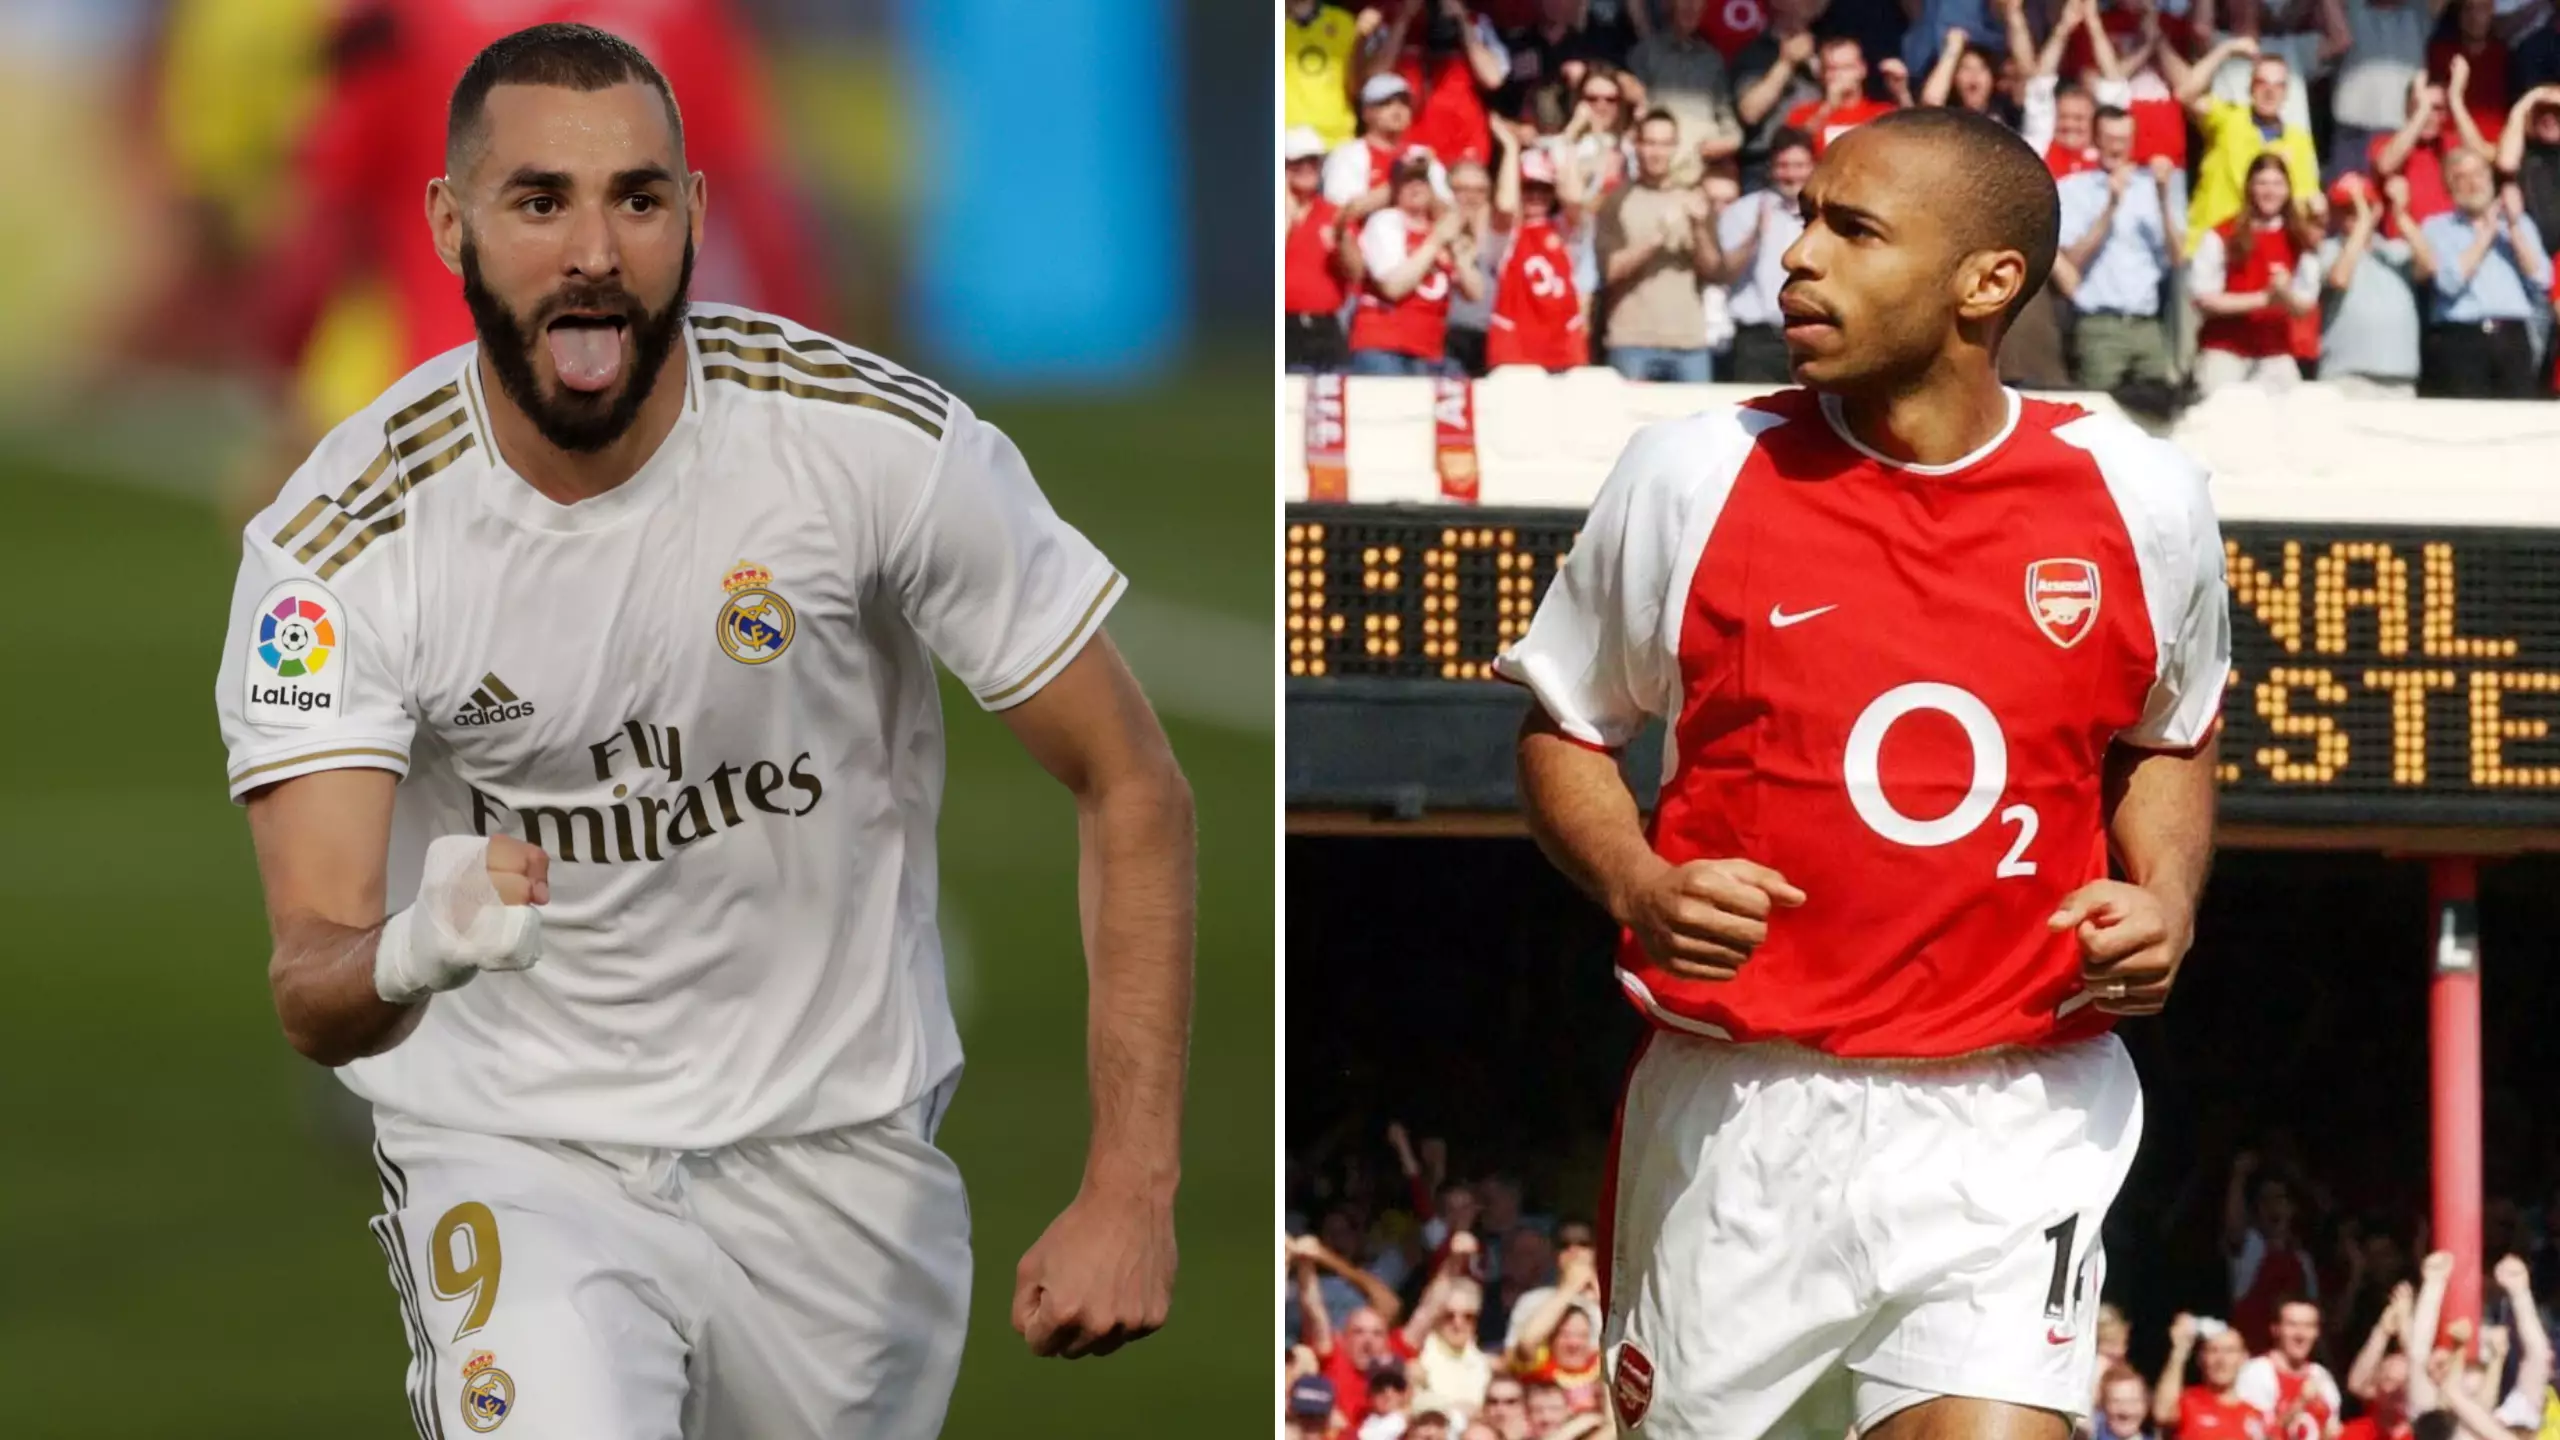 "Karim Benzema Is A More Complete Player Than Thierry Henry"